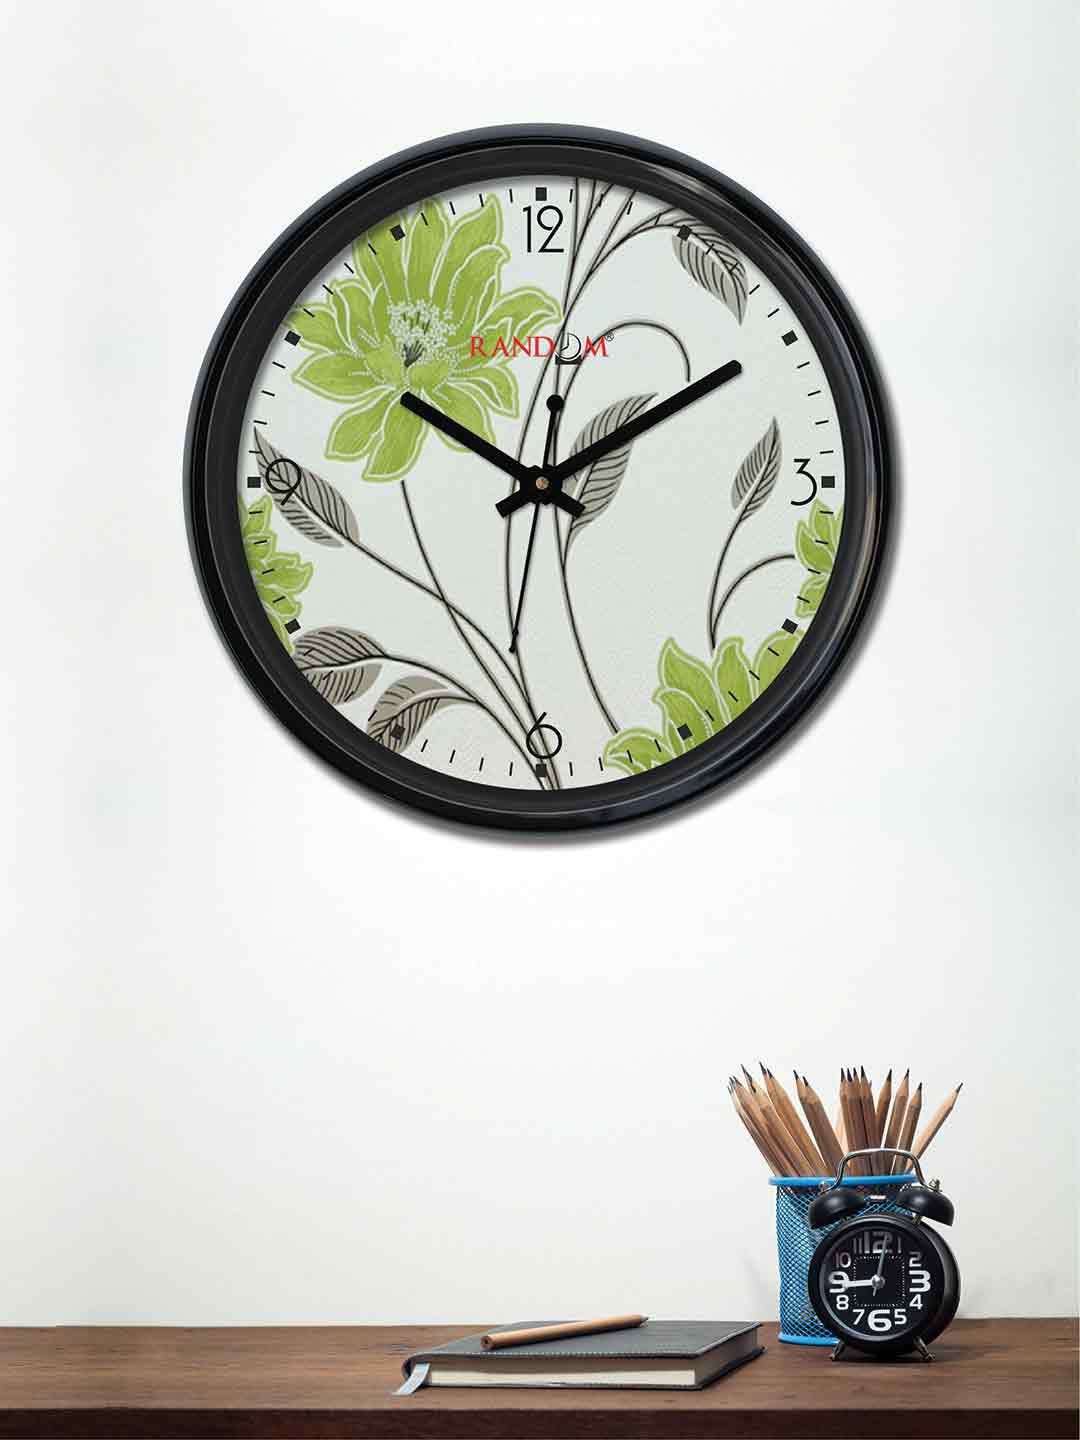 RANDOM Off-White & Green Round Printed Analogue Wall Clock (30 x 30 x 5) Price in India